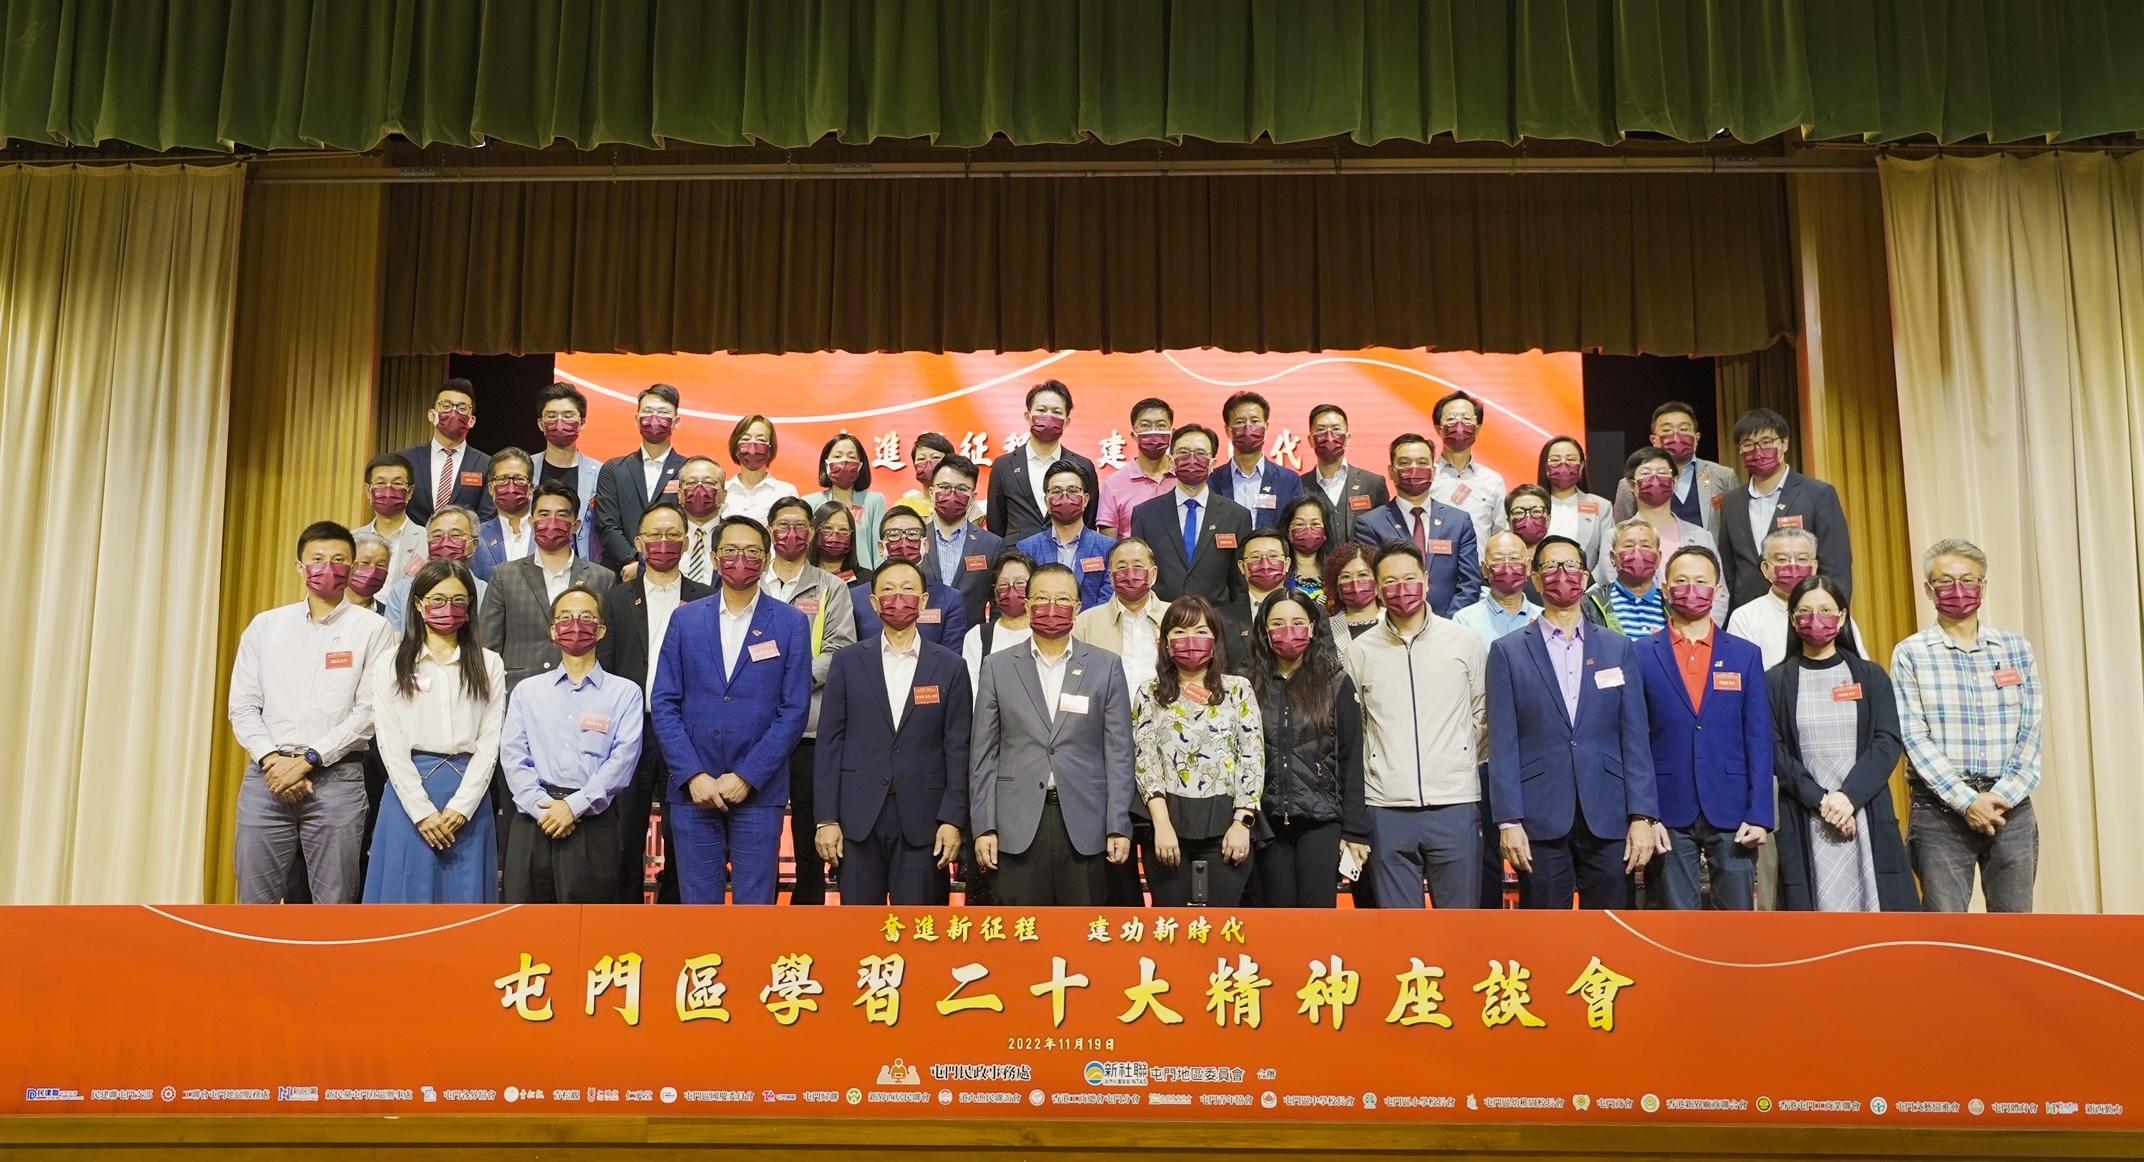 The Tuen Mun District Office, together with the New Territories Association of Societies Tuen Mun District Committee, held a session on "Spirit of the 20th National Congress of the CPC" at the hall of the Ching Chung Taoist Association Building on November 19. Photo shows the guests and participants at the session.